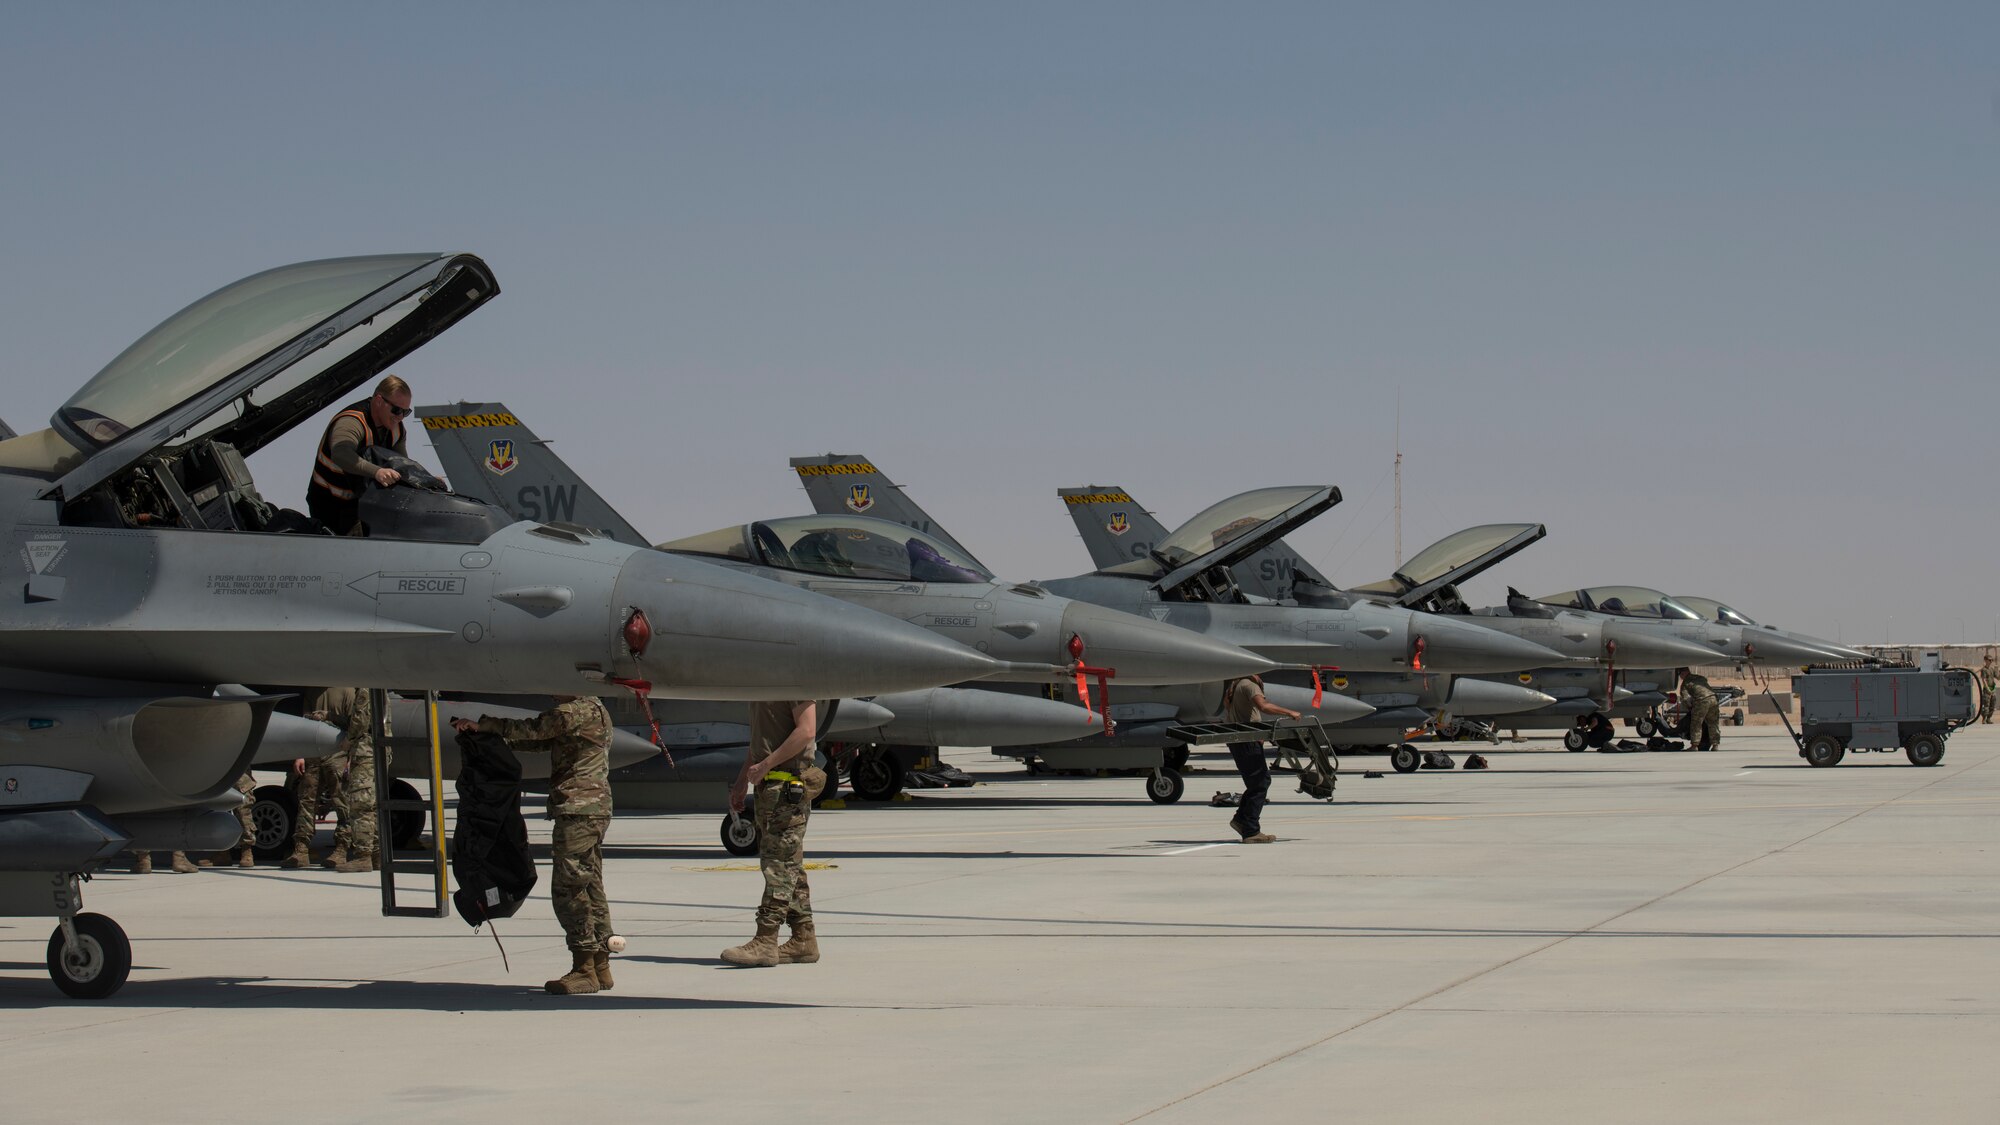 Six U.S. Air Force F-16 “Viper” Fighting Falcons assigned to the 79th Expeditionary Fighter Squadron rest on a flightline at an undisclosed location in the U.S. Central Command area of responsibility, Feb. 14, 2020.